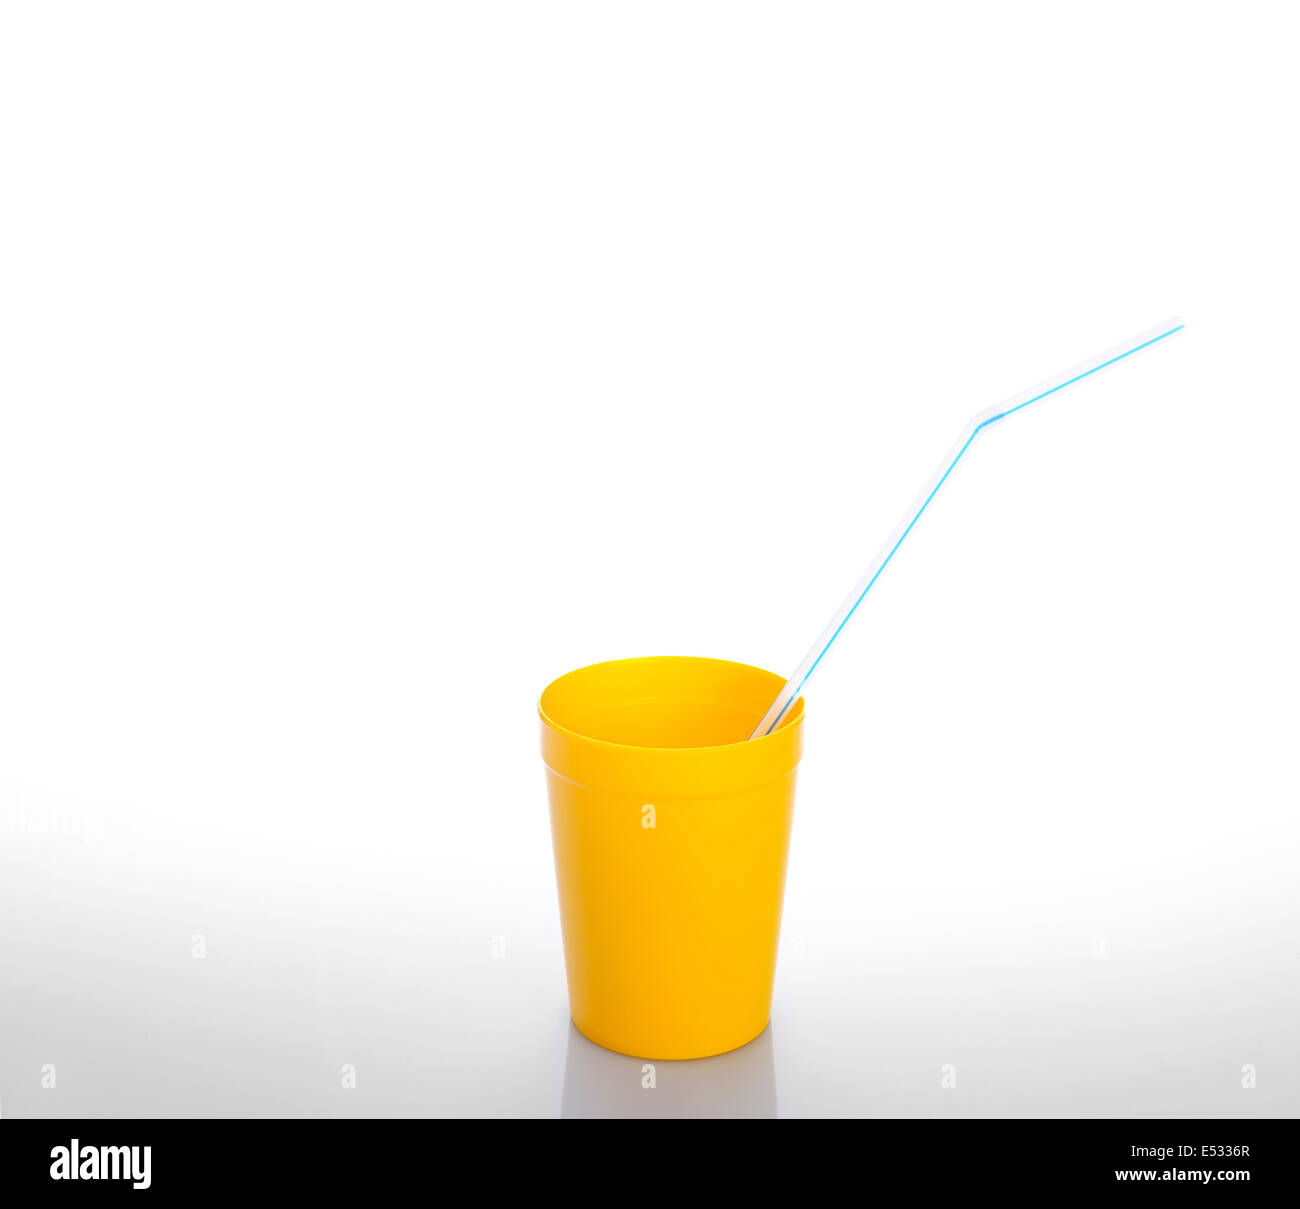 Yellow cup with blue drinking straw isolated over white Stock Photo